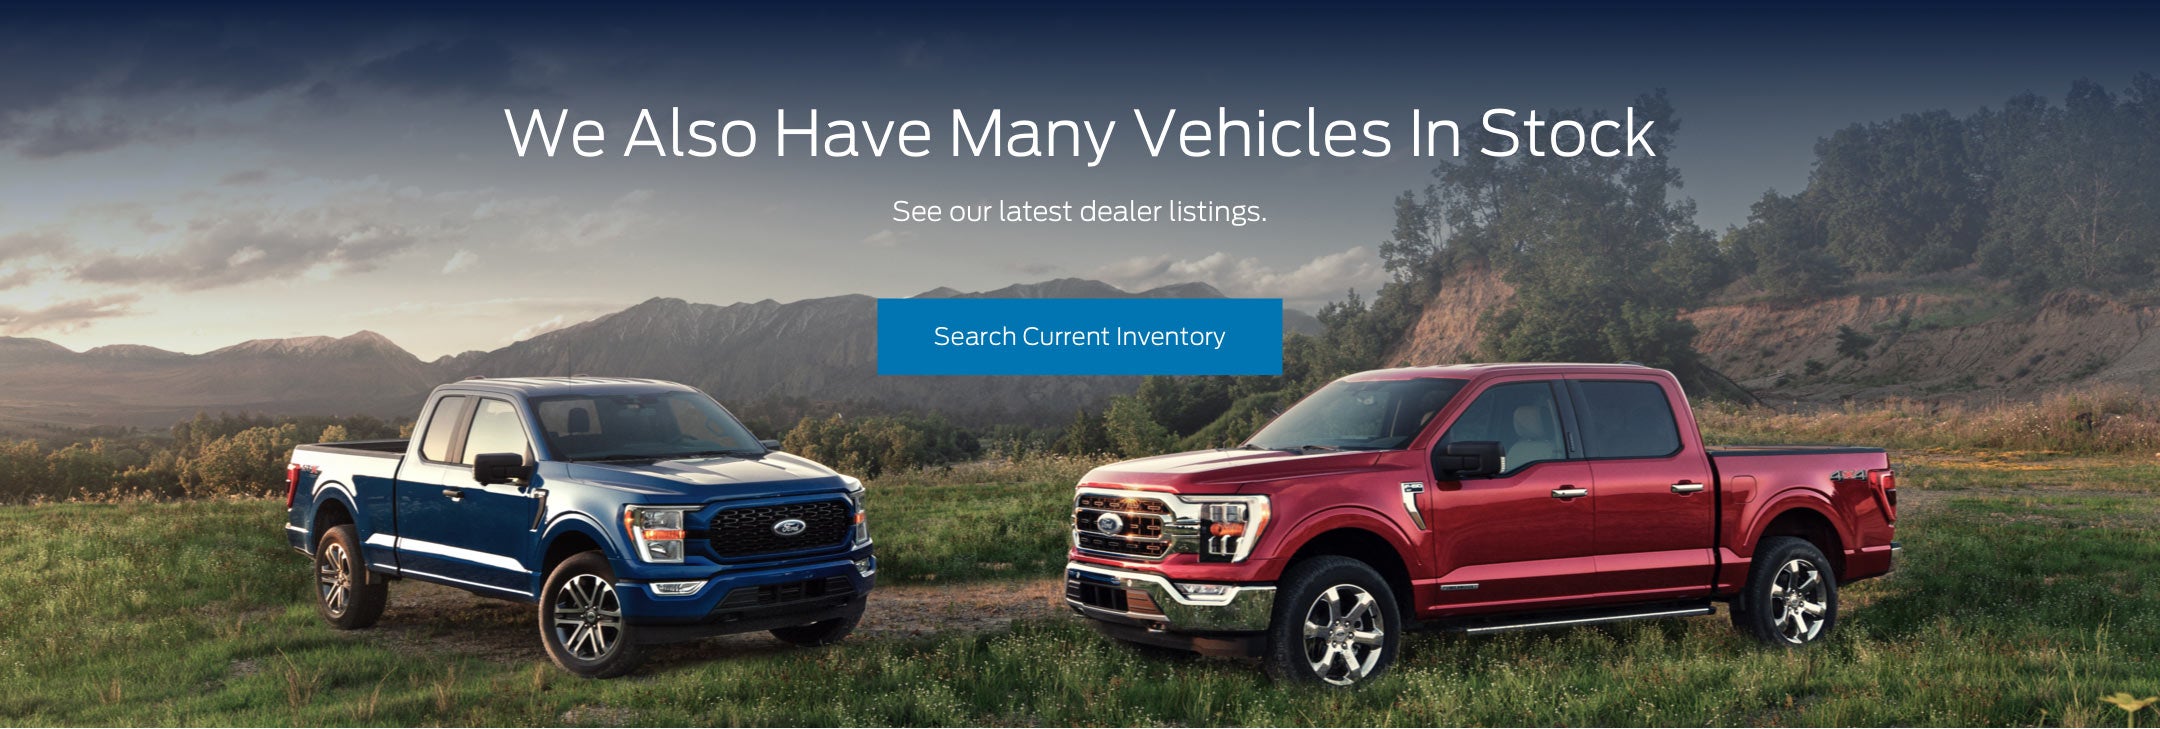 Ford vehicles in stock | Ford of Franklin in Franklin TN